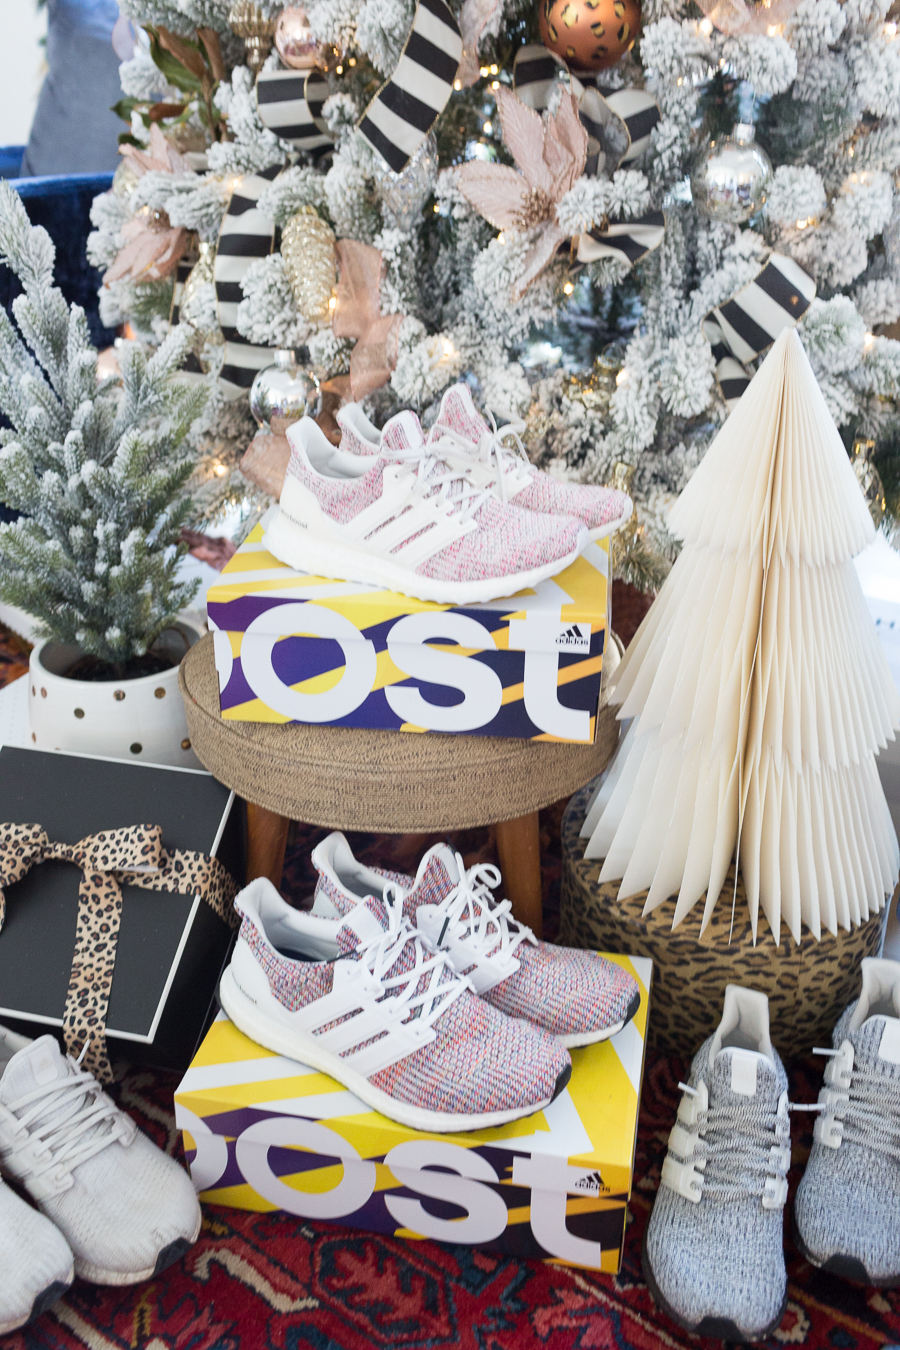 Adidas Holiday Gift Ideas from Finish 